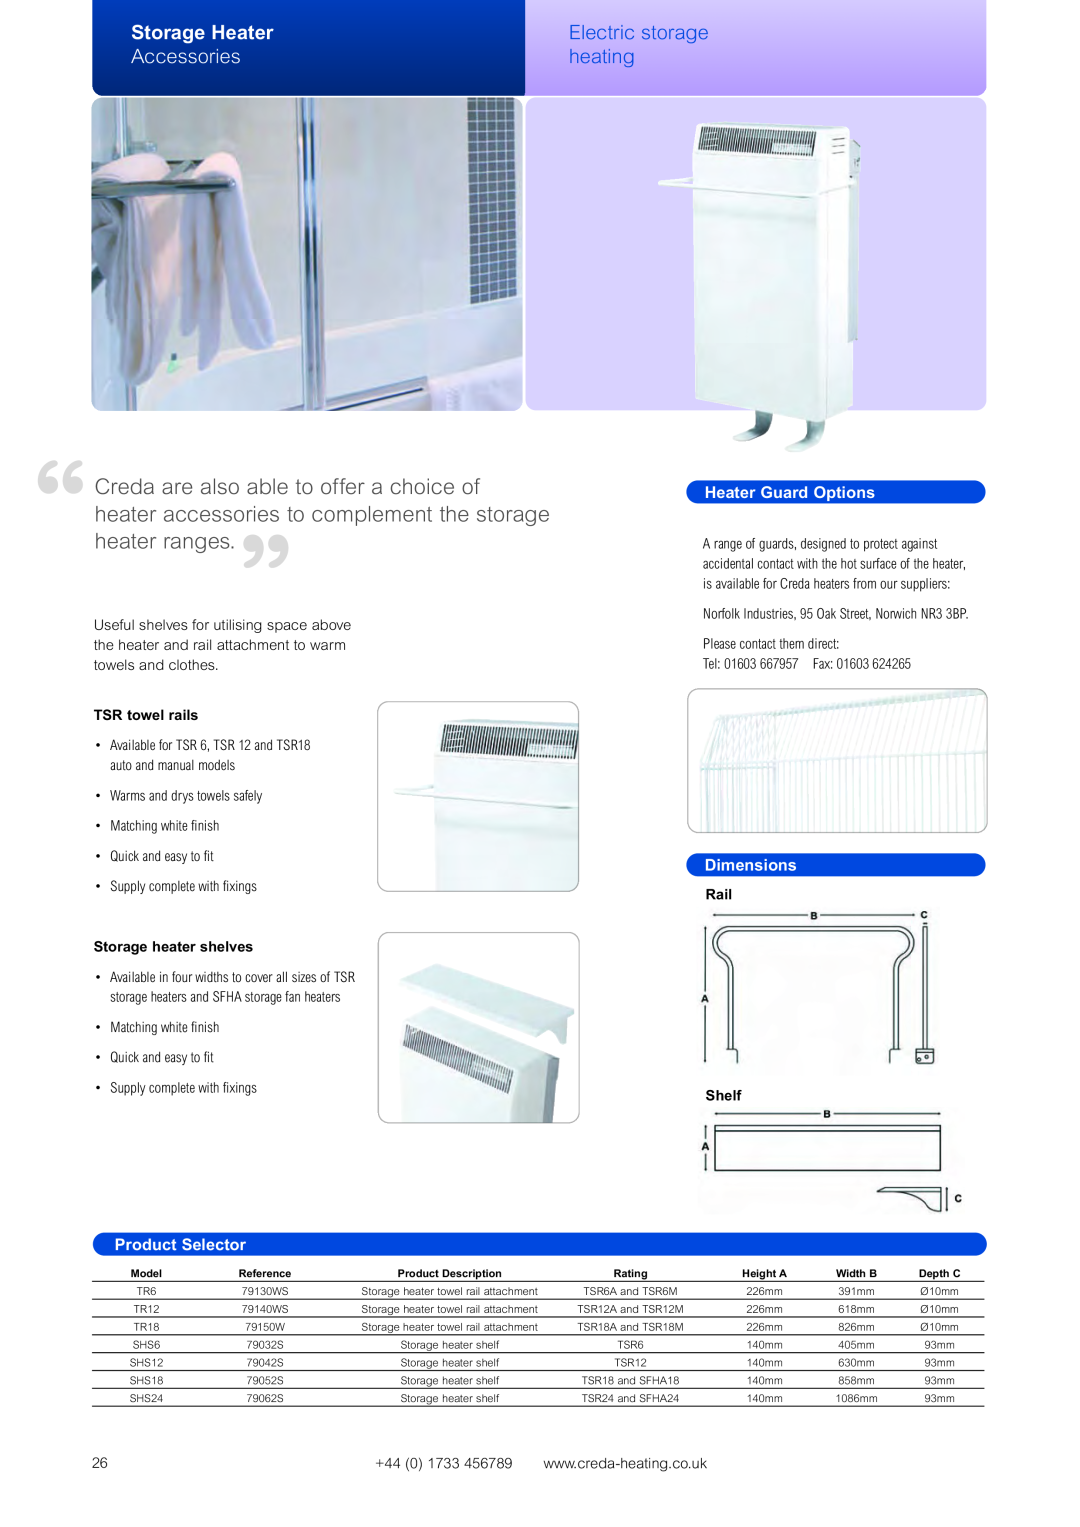 Creda Heating Solution manual Storage Heater, Accessories, Electric storage heating, Heater Guard Options, Dimensions 